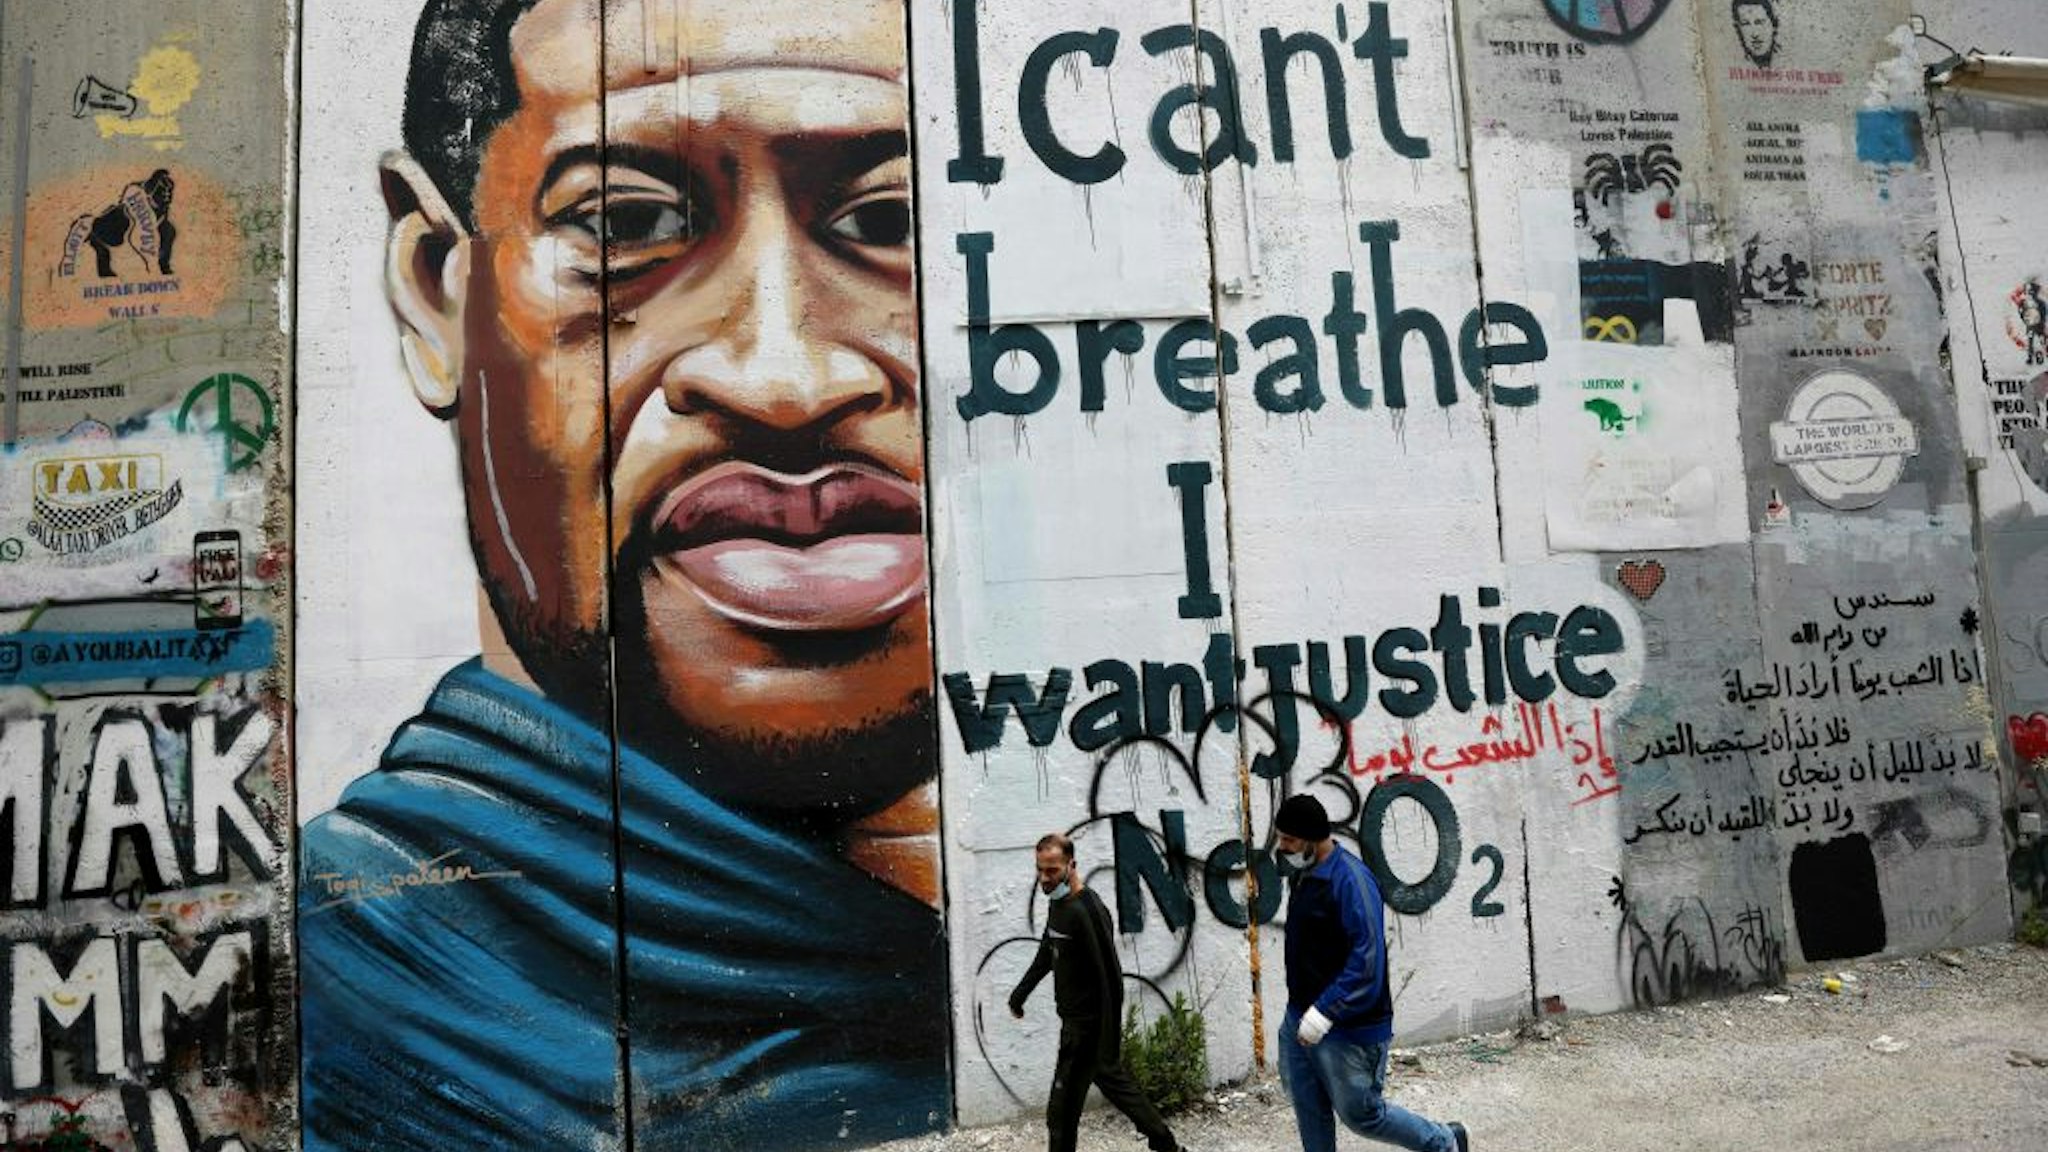 PALESTINIAN-ISRAEL-US-RACISM-POLICE-TRIAL-FLOYD People walk past a mural showing the face of George Floyd, an unarmed handcuffed black man who died after a white policeman knelt on his neck during an arrest in the US, painted on a section of Israel's controversial separation barrier in the city of Bethlehem in the occupied West Bank on March 31, 2021. - The teenager who took the viral video of George Floyd's death said on March 30, at the trial of the white police officer charged with killing the 46-year-old Black man that she knew at the time "it wasn't right." Darnella Frazier, 18, was among the witnesses who gave emotional testimony on Tuesday at the high-profile trial of former Minneapolis police officer Derek Chauvin. Chauvin, 45, is charged with murder and manslaughter for his role in Floyd's May 25, 2020 death, which was captured on video by Frazier and seen by millions, sparking anti-racism protests around the globe. (Photo by Emmanuel DUNAND / AFP) (Photo by EMMANUEL DUNAND/AFP via Getty Images) EMMANUEL DUNAND / Contributor via Getty Images